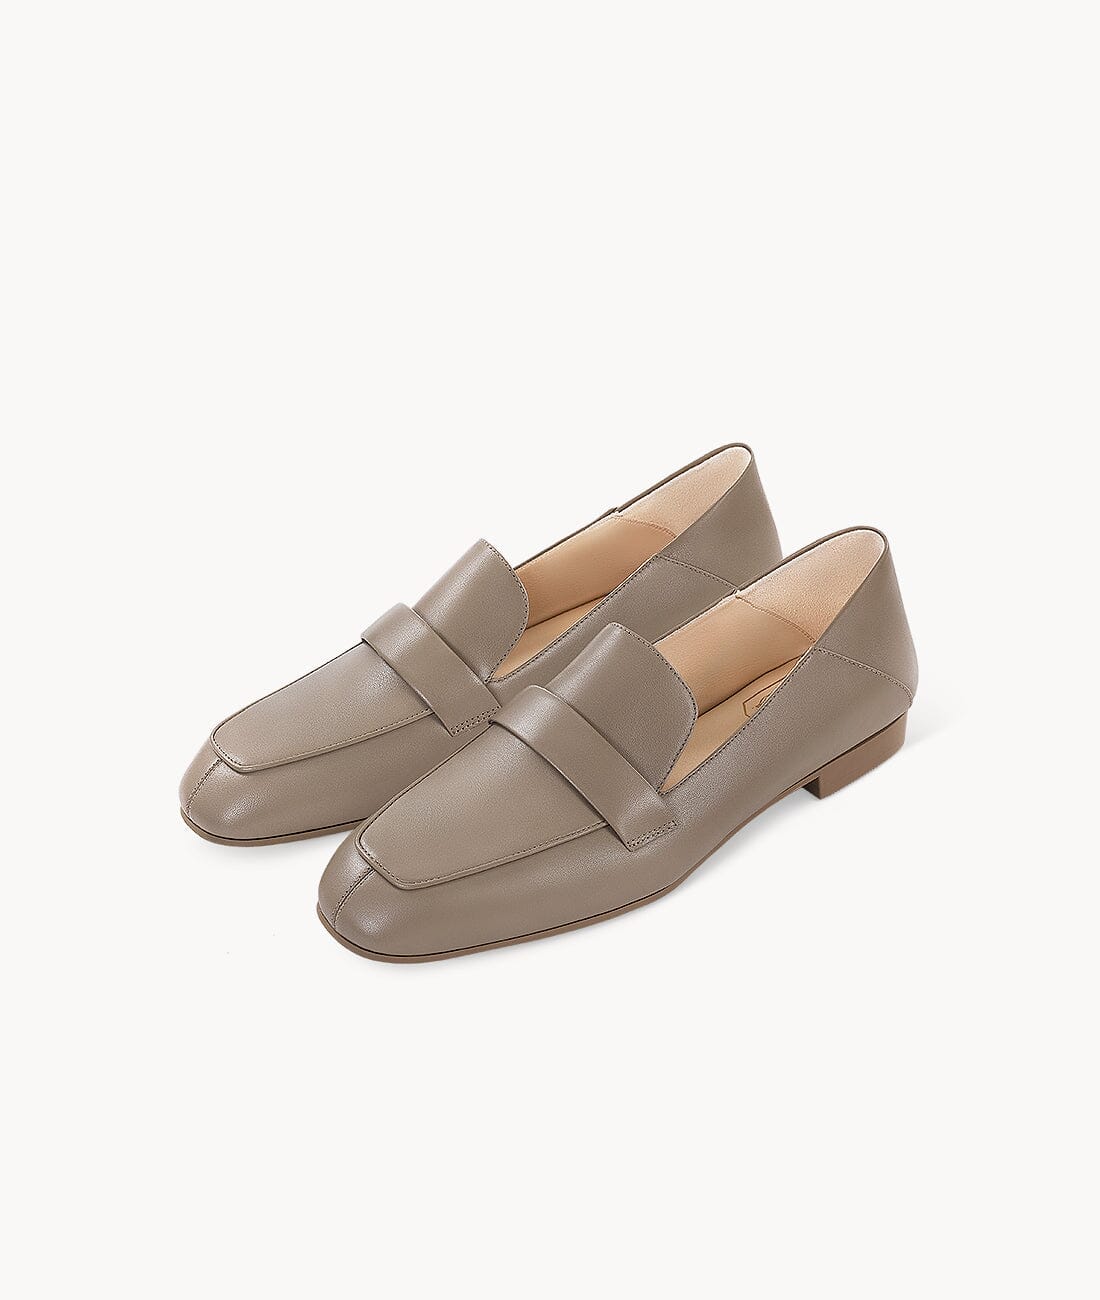 loafer  shoes women